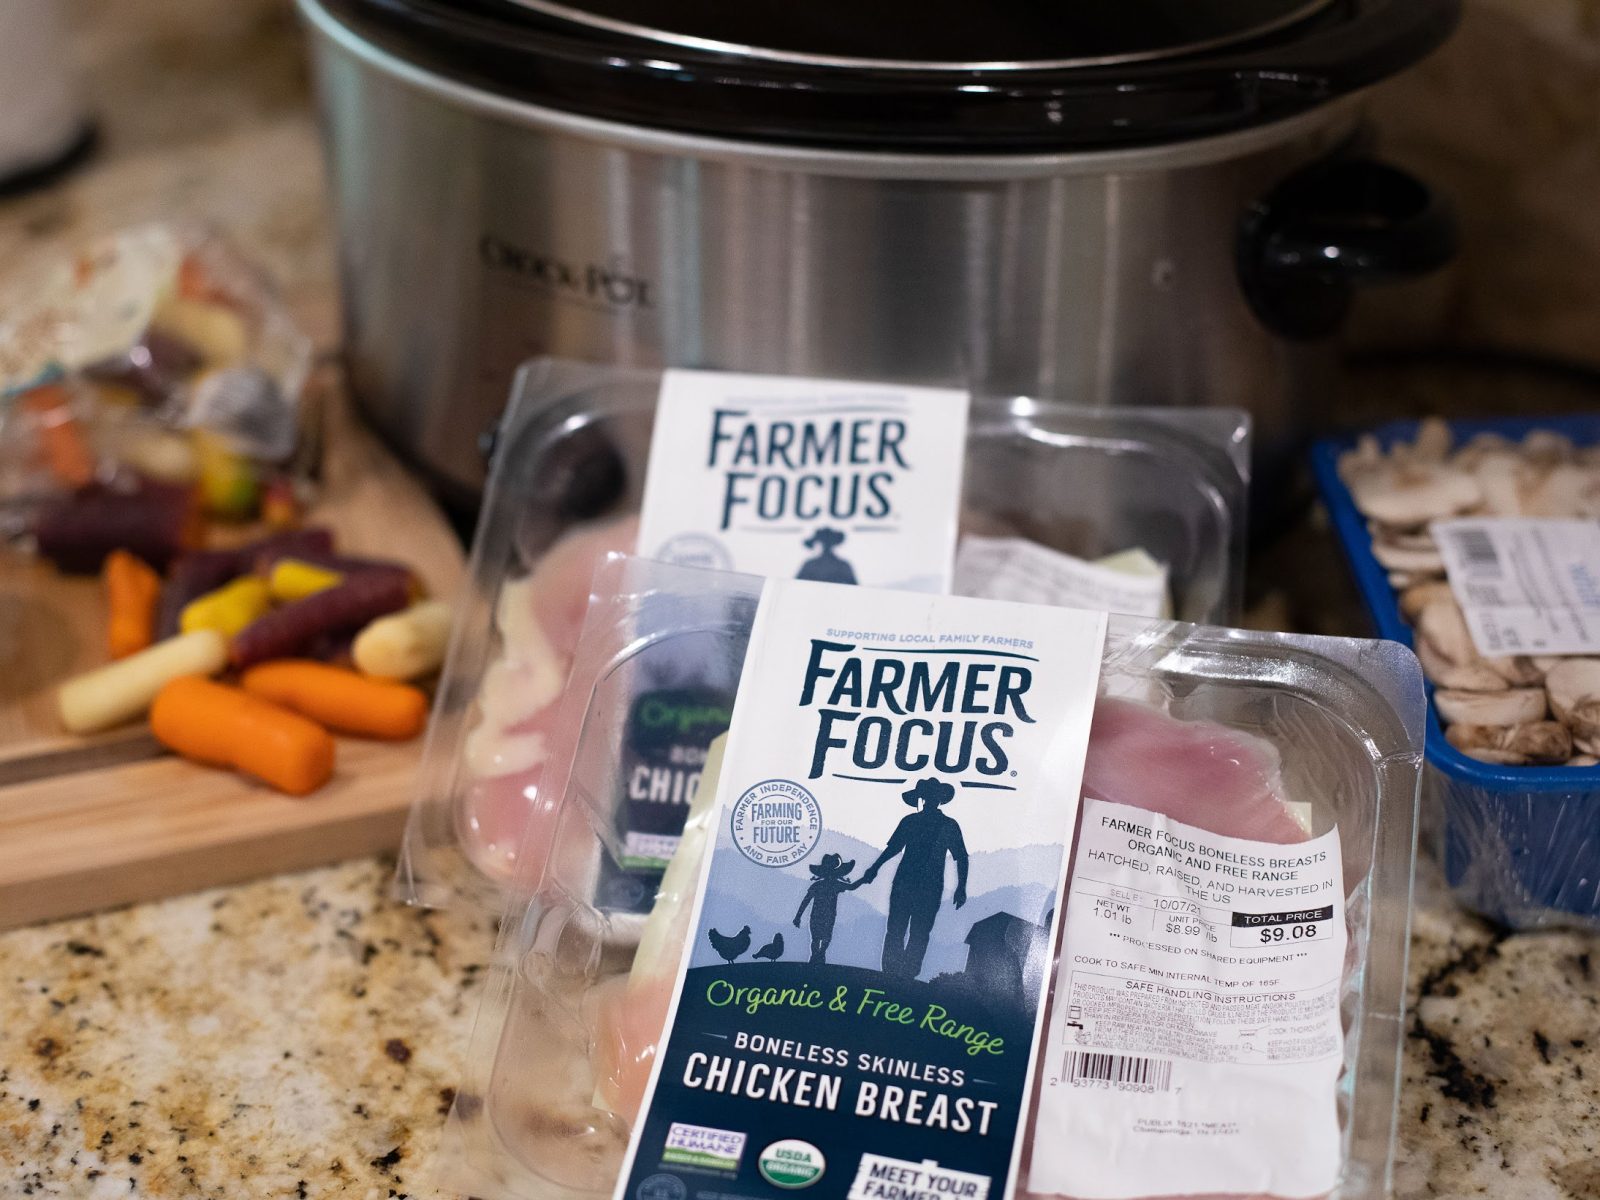 Pick Up Farmer Focus Chicken For Your Favorite Fall Recipes – Tasty Chicken Breast Is BOGO This Week At Publix